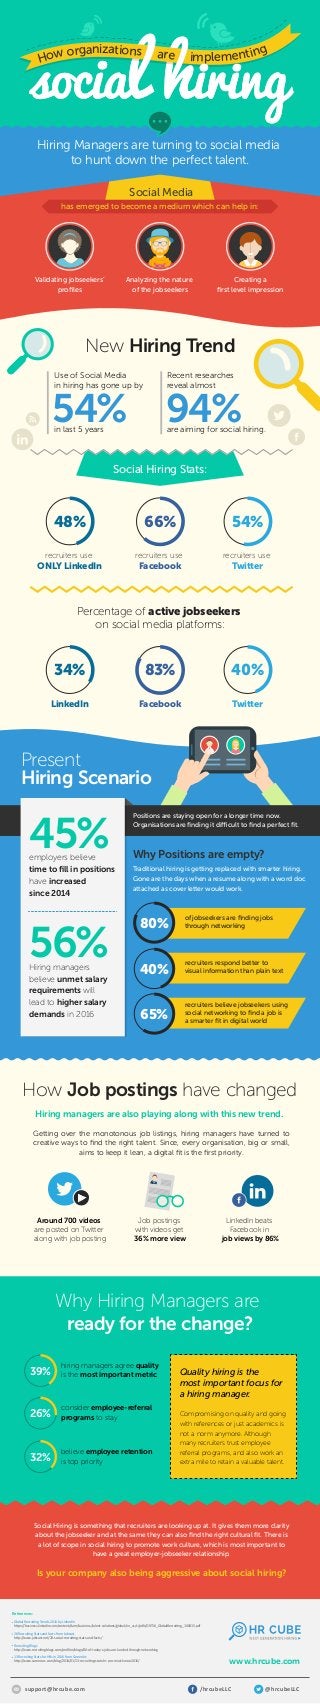 New Hiring Trend
Social Hiring Stats:
Present
Hiring Scenario
How Job postings have changed
Why Hiring Managers are
ready for the change?
Percentage of active jobseekers
on social media platforms:
Why Positions are empty?
Validating jobseekers’
proﬁles
Analyzing the nature
of the jobseekers
Creating a
ﬁrst level impression
54%
66%
83% 40%34%
94%in last 5 years
recruiters use
Facebook
48%
recruiters use
ONLY LinkedIn
54%
recruiters use
Twitter
FacebookLinkedIn Twitter
Use of Social Media
in hiring has gone up by
45%employers believe
time to ﬁll in positions
have increased
since 2014
Positions are staying open for a longer time now.
Organisations are ﬁnding it difficult to ﬁnd a perfect ﬁt.
56%Hiring managers
believe unmet salary
requirements will
lead to higher salary
demands in 2016
Recent researches
reveal almost
are aiming for social hiring.
80%
40%
65%
Traditional hiring is getting replaced with smarter hiring.
Gone are the days when a resume along with a word doc
attached as cover letter would work.
of jobseekers are ﬁnding jobs
through networking
recruiters respond better to
visual information than plain text
recruiters believe jobseekers using
social networking to ﬁnd a job is
a smarter ﬁt in digital world
39%
26%
32%
hiring managers agree quality
is the most important metric
consider employee-referral
programs to stay
believe employee retention
is top priority
Around 700 videos
are posted on Twitter
along with job posting
Job postings
with videos get
36% more view
LinkedIn beats
Facebook in
job views by 86%
Hiring managers are also playing along with this new trend.
Getting over the monotonous job listings, hiring managers have turned to
creative ways to ﬁnd the right talent. Since, every organisation, big or small,
aims to keep it lean, a digital ﬁt is the ﬁrst priority.
Quality hiring is the
most important focus for
a hiring manager.
Compromising on quality and going
with references or just academics is
not a norm anymore. Although
many recruiters trust employee
referral programs, and also work an
extra mile to retain a valuable talent.
Global Recruiting Trends 2016 by LinkedIn
https://business.linkedin.com/content/dam/business/talent-solutions/global/en_us/c/pdfs/GRT16_GlobalRecruiting_100815.pdf
26 Recruiting Stats and facts from Jobcast
http://www.jobcast.net/26-social-recruiting-stats-and-facts/
Recruiting Blogs
http://www.recruitingblogs.com/proﬁles/blogs/80-of-today-s-jobs-are-landed-through-networking
13 Recruiting Stats for HRs in 2016 from CareerArc
http://www.careerarc.com/blog/2016/01/13-recruiting-stats-hr-pro-must-know-2016/
www.hrcube.com
Hiring Managers are turning to social media
to hunt down the perfect talent.
Social Media
has emerged to become a medium which can help in:
How organizations are implementing-----------------------------------------------
References:
support@hrcube.com @hrcubeLLC/hrcubeLLC
Social Hiring is something that recruiters are looking up at. It gives them more clarity
about the jobseeker and at the same they can also ﬁnd the right cultural ﬁt. There is
a lot of scope in social hiring to promote work culture, which is most important to
have a great employer-jobseeker relationship.
Is your company also being aggressive about social hiring?
 